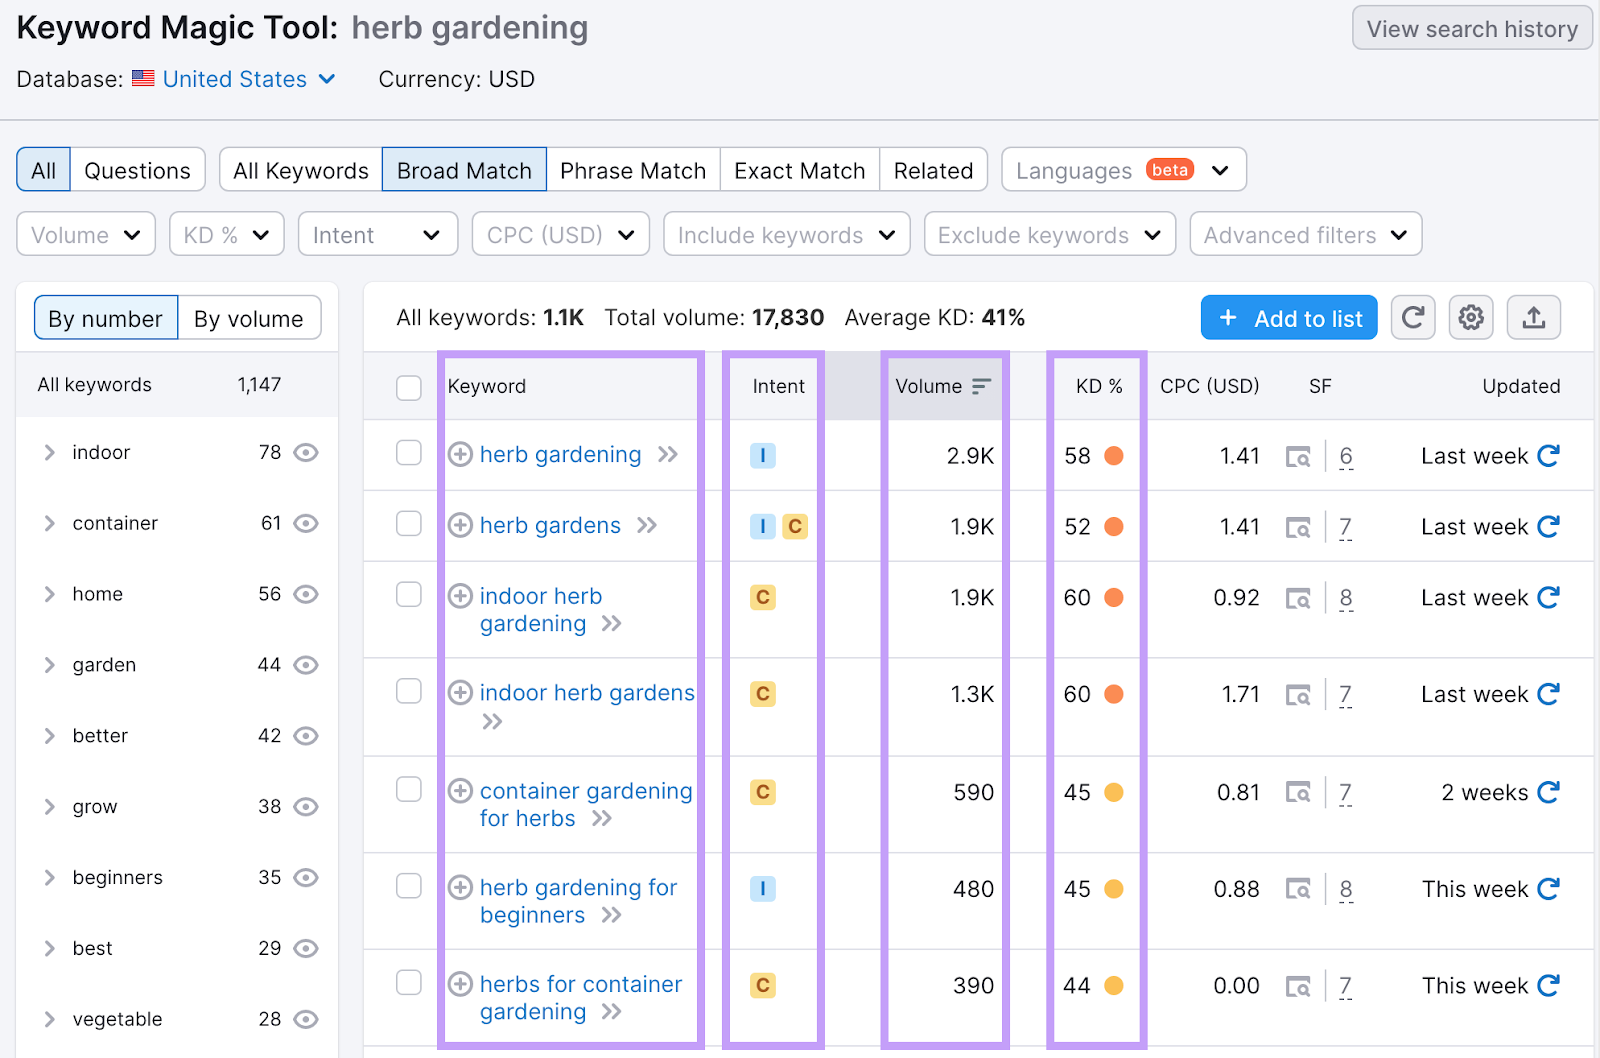 “Intent,” “Volume,” and “KD%" columns highlighted in Keyword Magic Tool